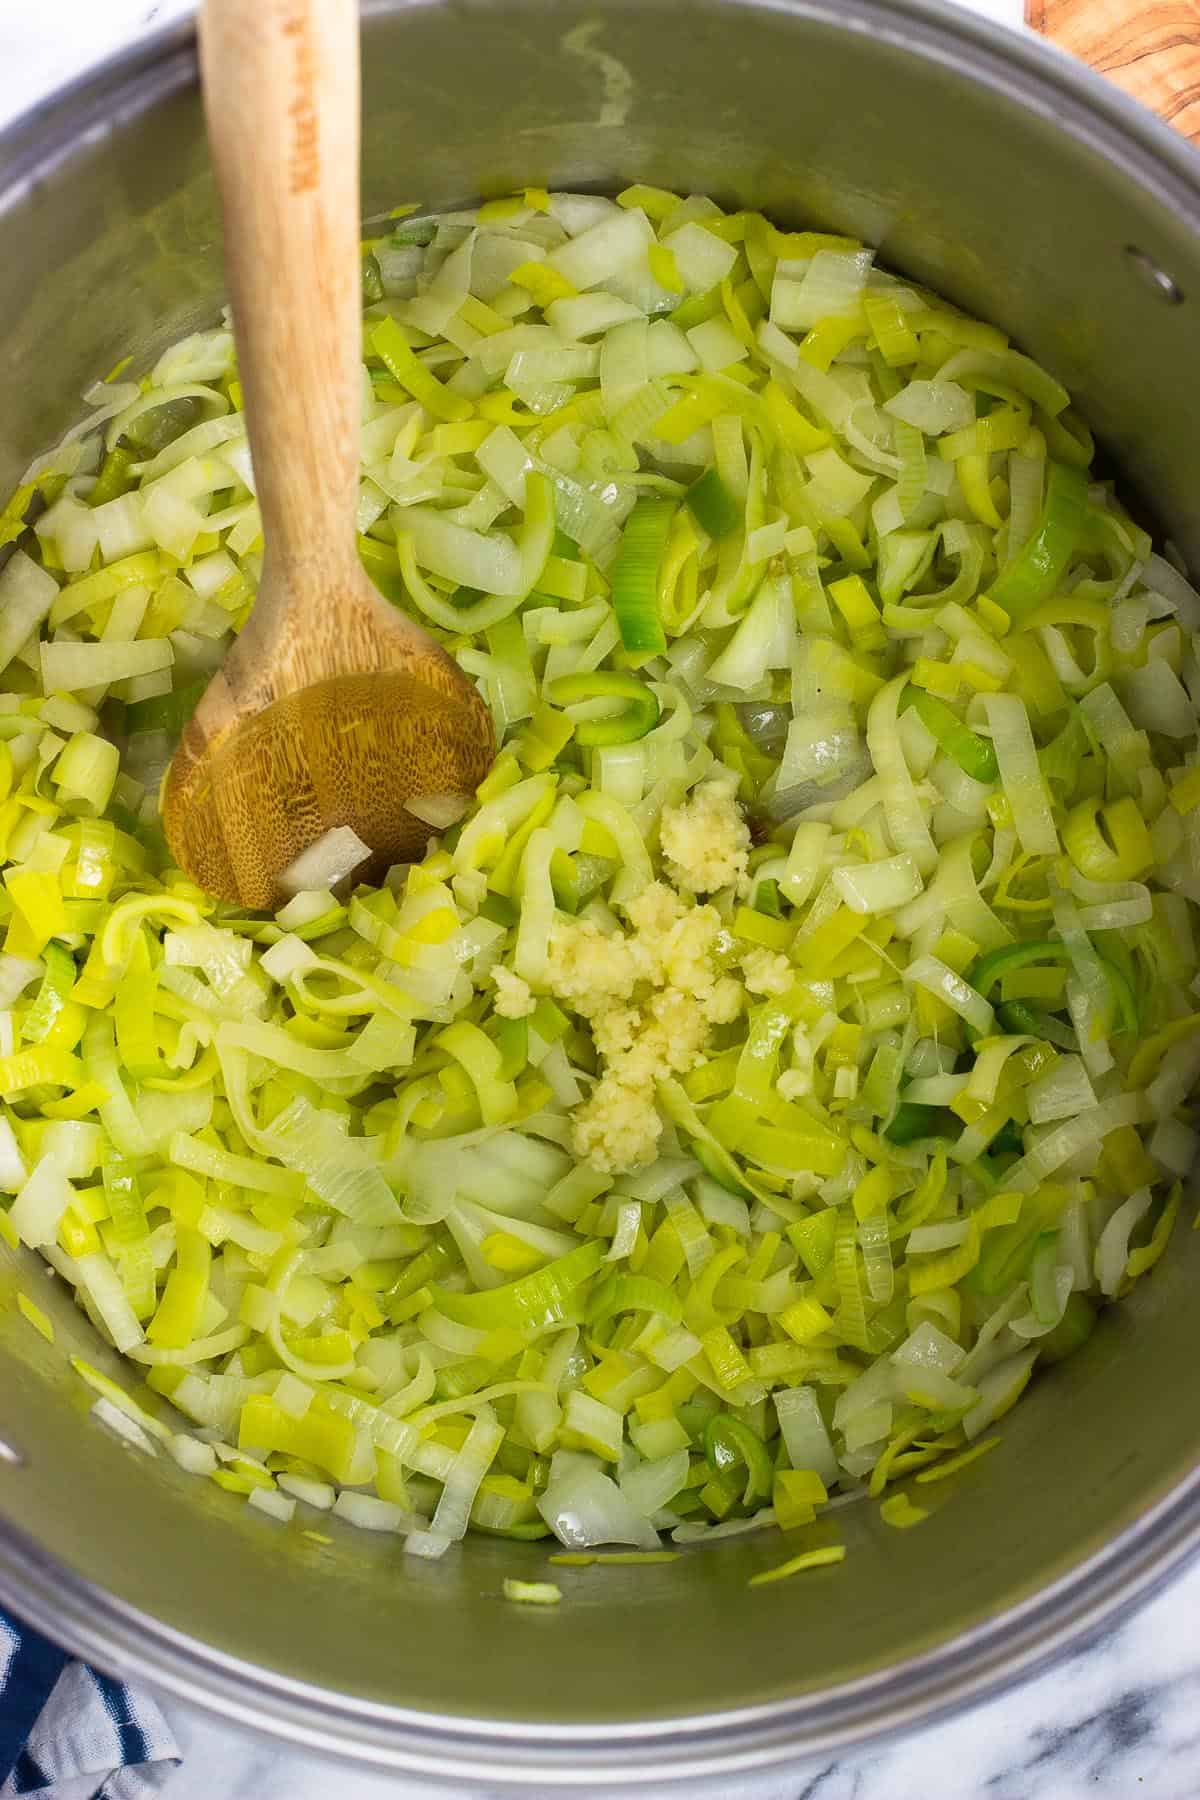 Pressed garlic added to the pot of sauteed leeks and onions.